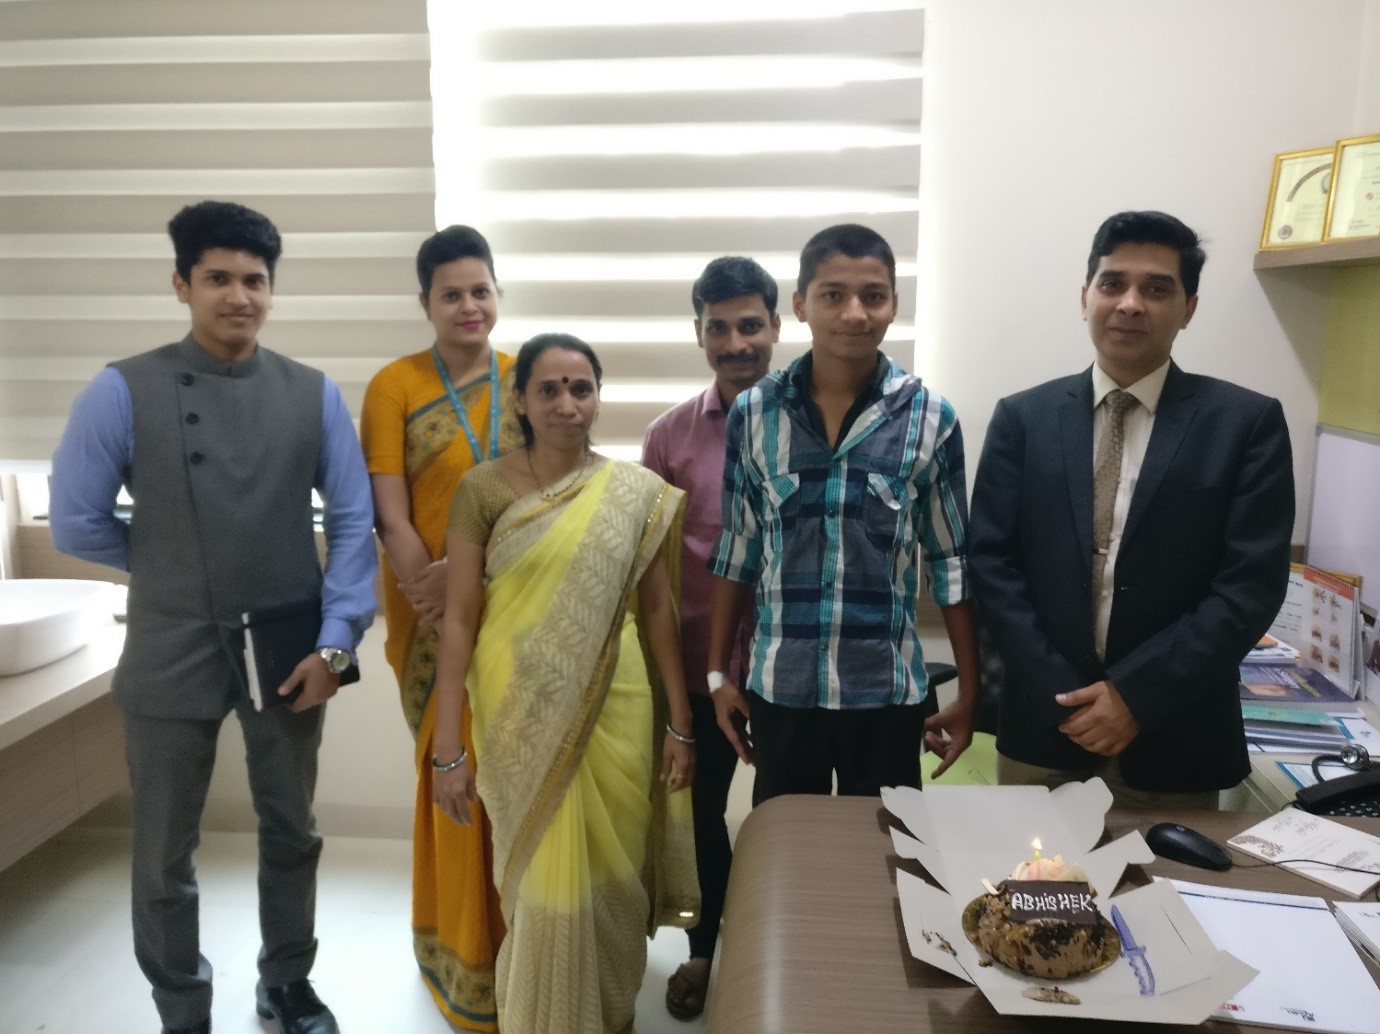 Dr. Shalin Dubey, Laparoscopic surgeon, Apollo Hospitals - Navi Mumbai successfully performed surgery on a 17-year-old patient with complicated liver and spleen injury